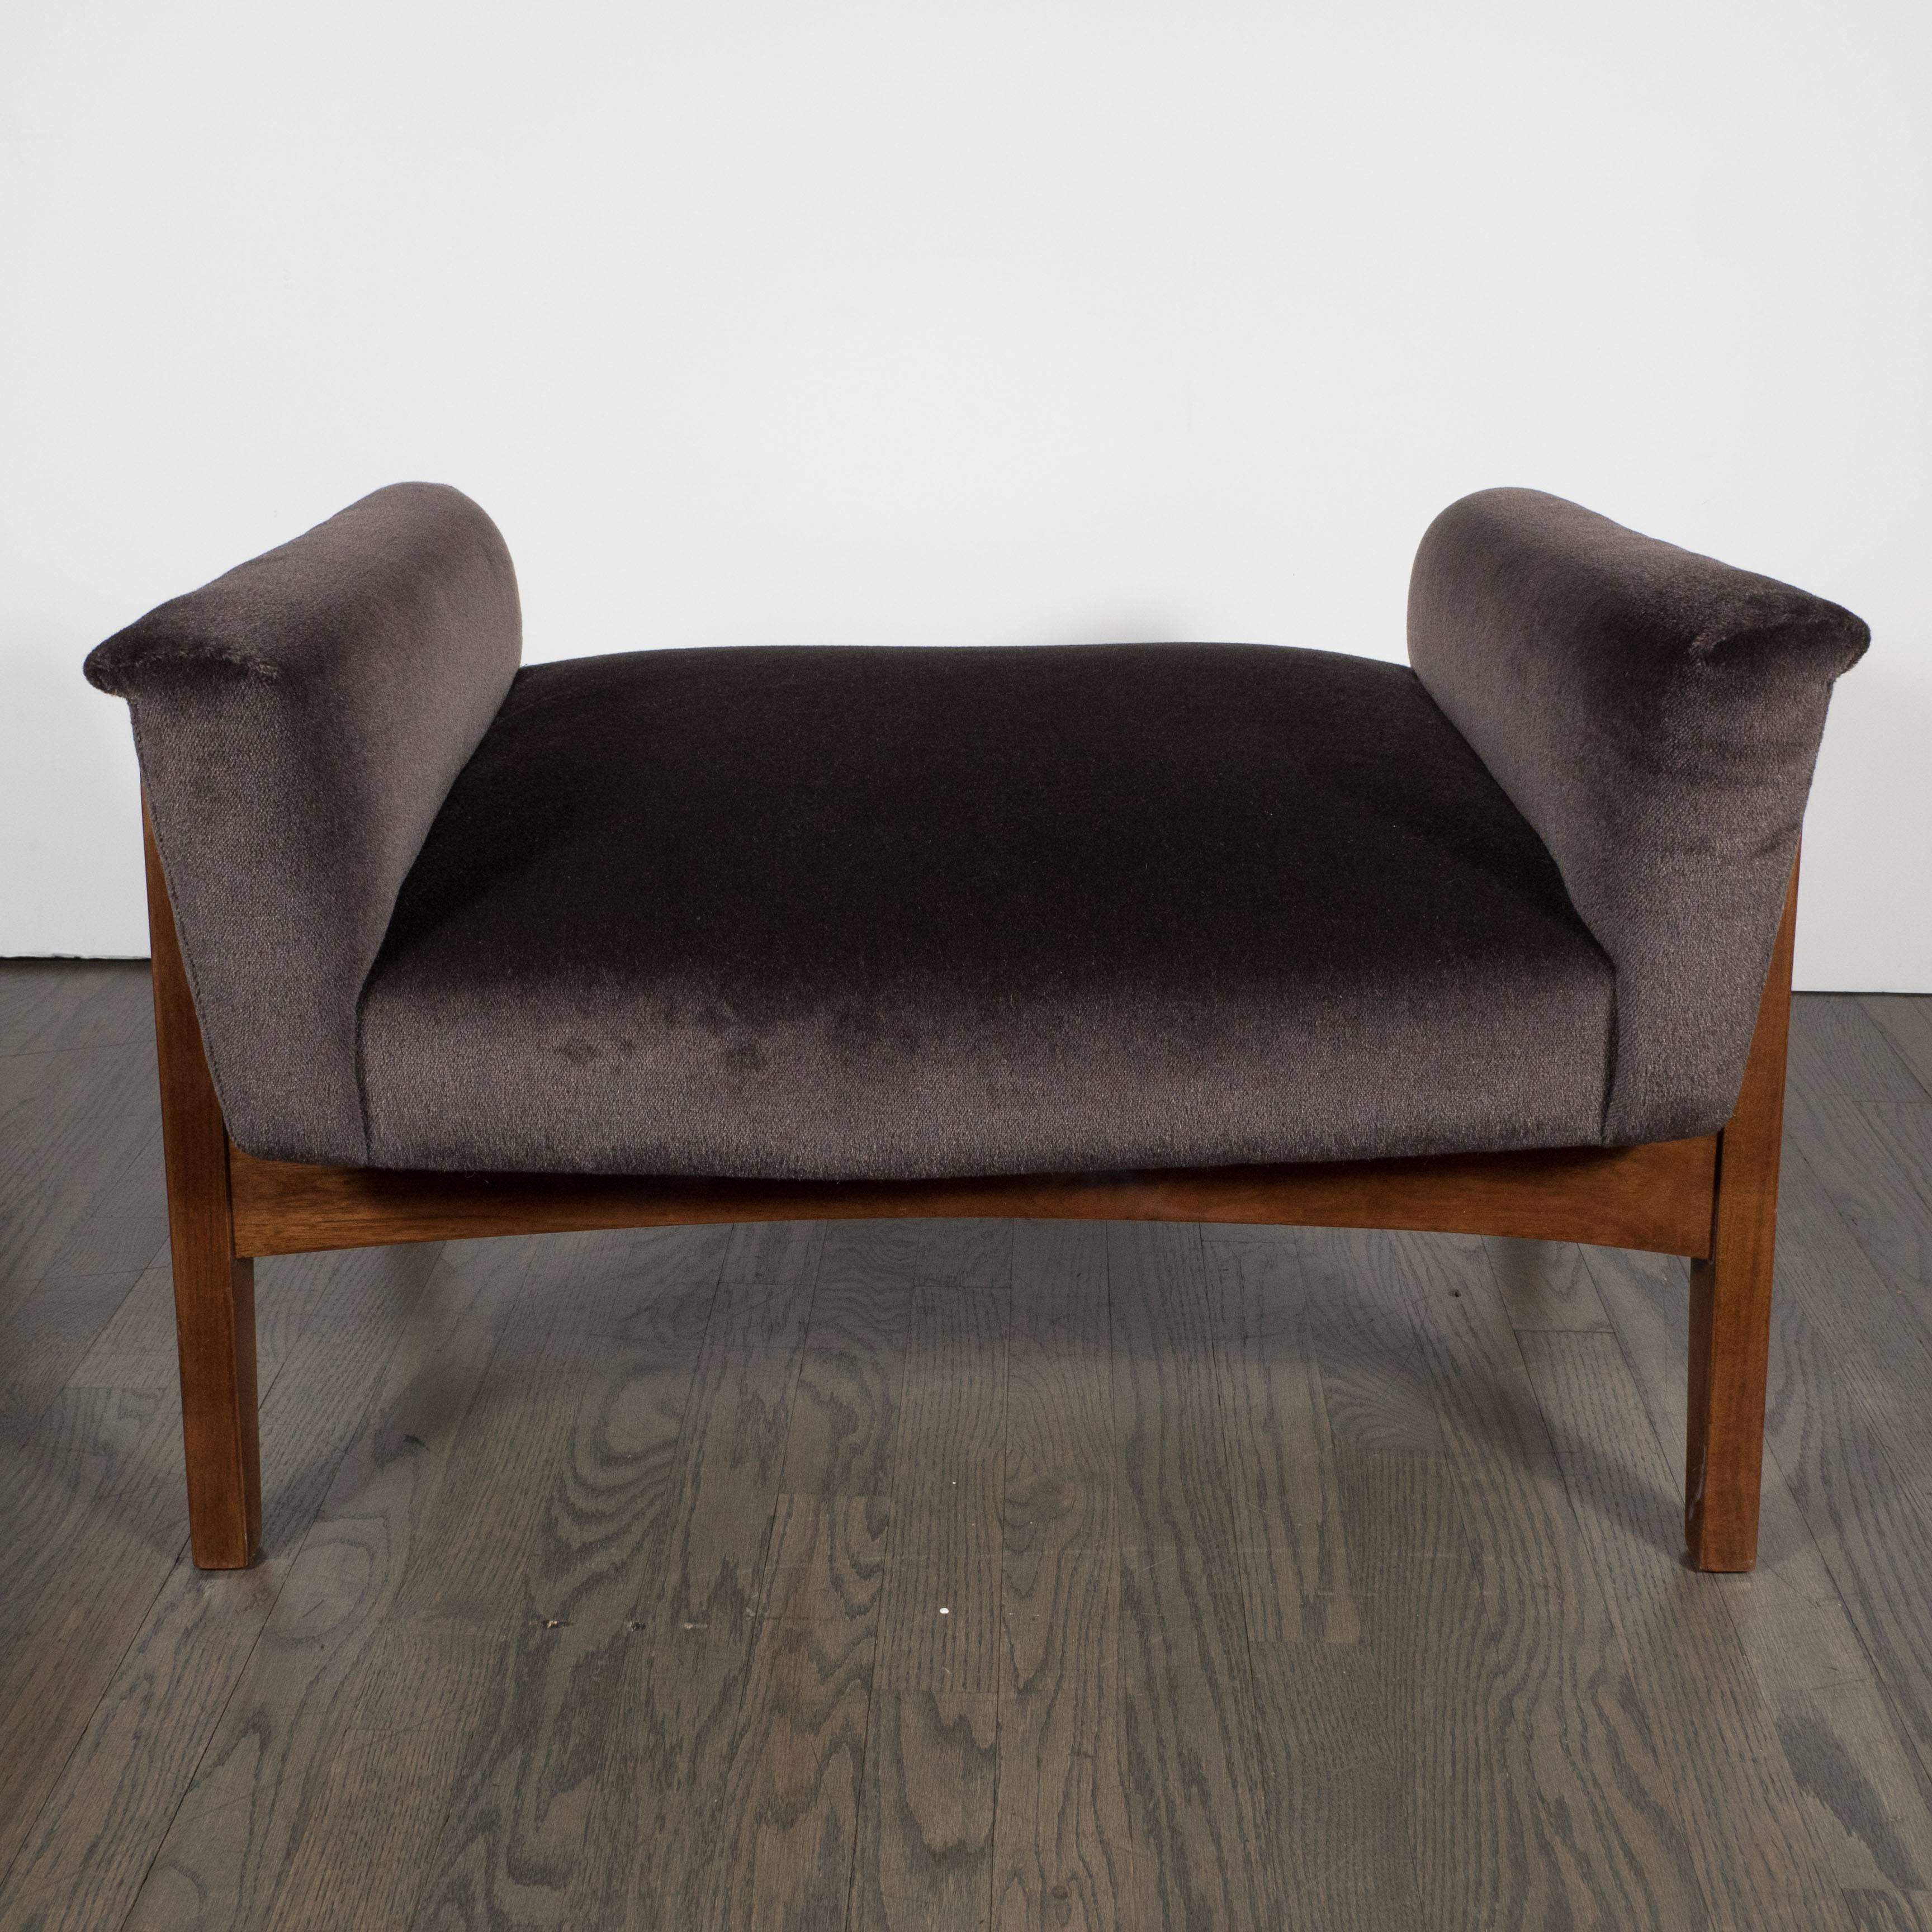 A Mid-Century Modernist footstool in chocolate mohair and hand-rubbed walnut base. A slanted, U-shaped upholstered seat rests on a splayed base in hand-rubbed walnut. A lovely piece of 1950s American Mid-Century design and quality. It has been mint